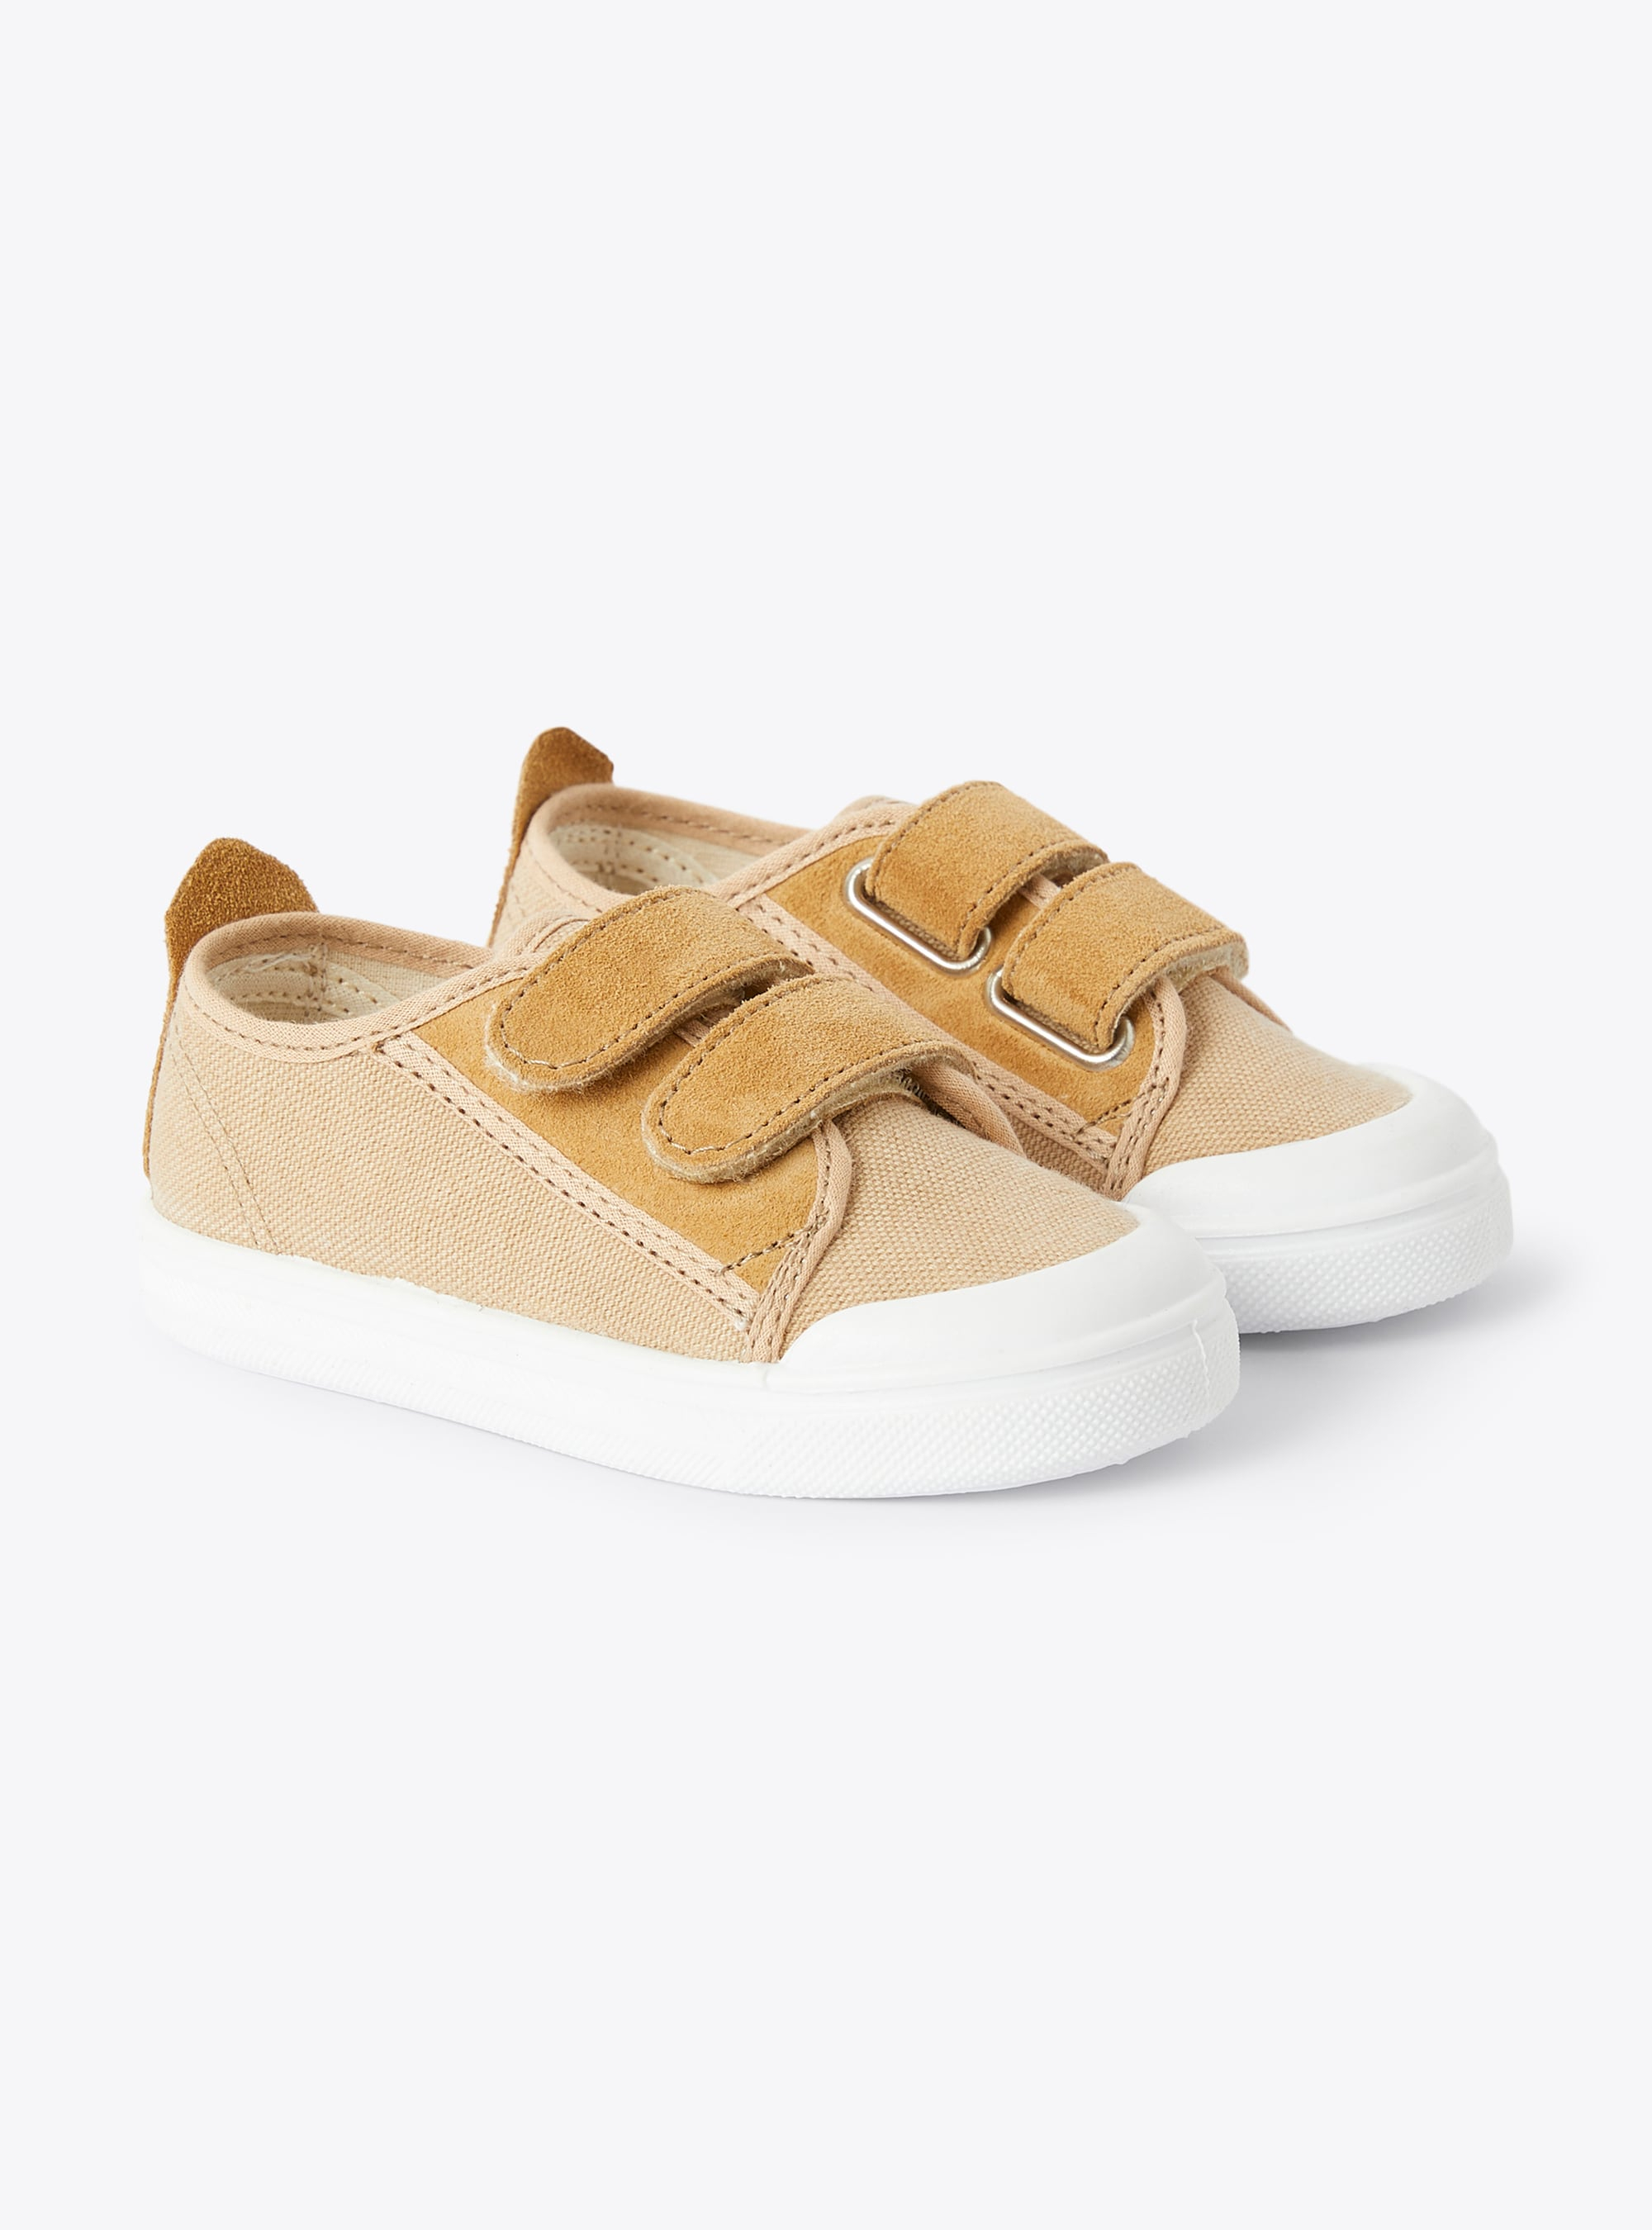 Oatmeal-hued canvas sneaker with a double riptape - Shoes - Il Gufo